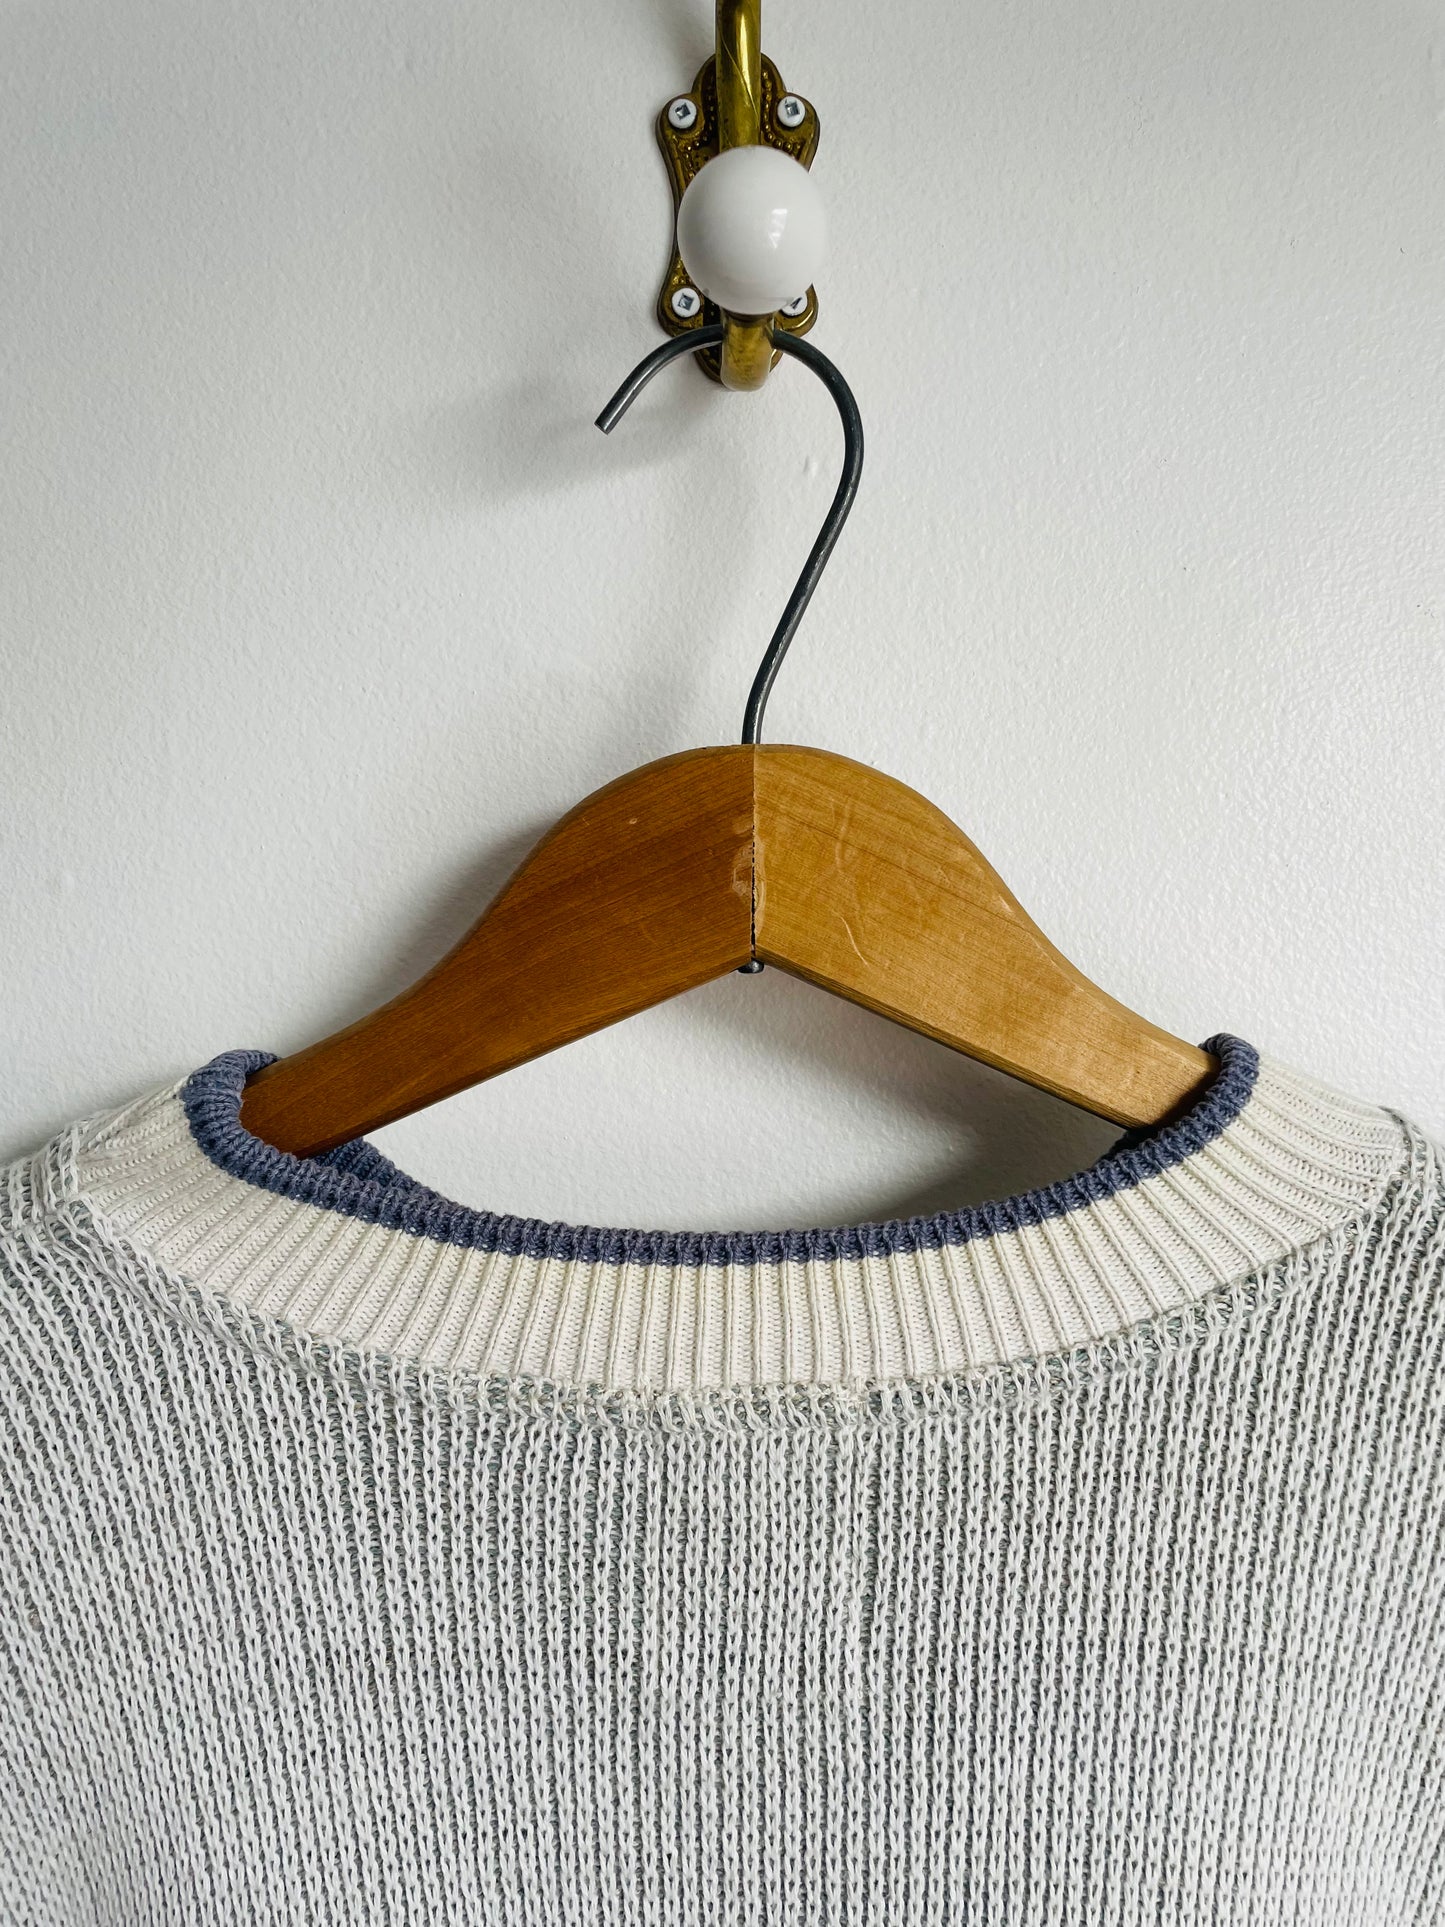 TT & Co. Sport 100% Cotton Knit Sweater - Made in Canada